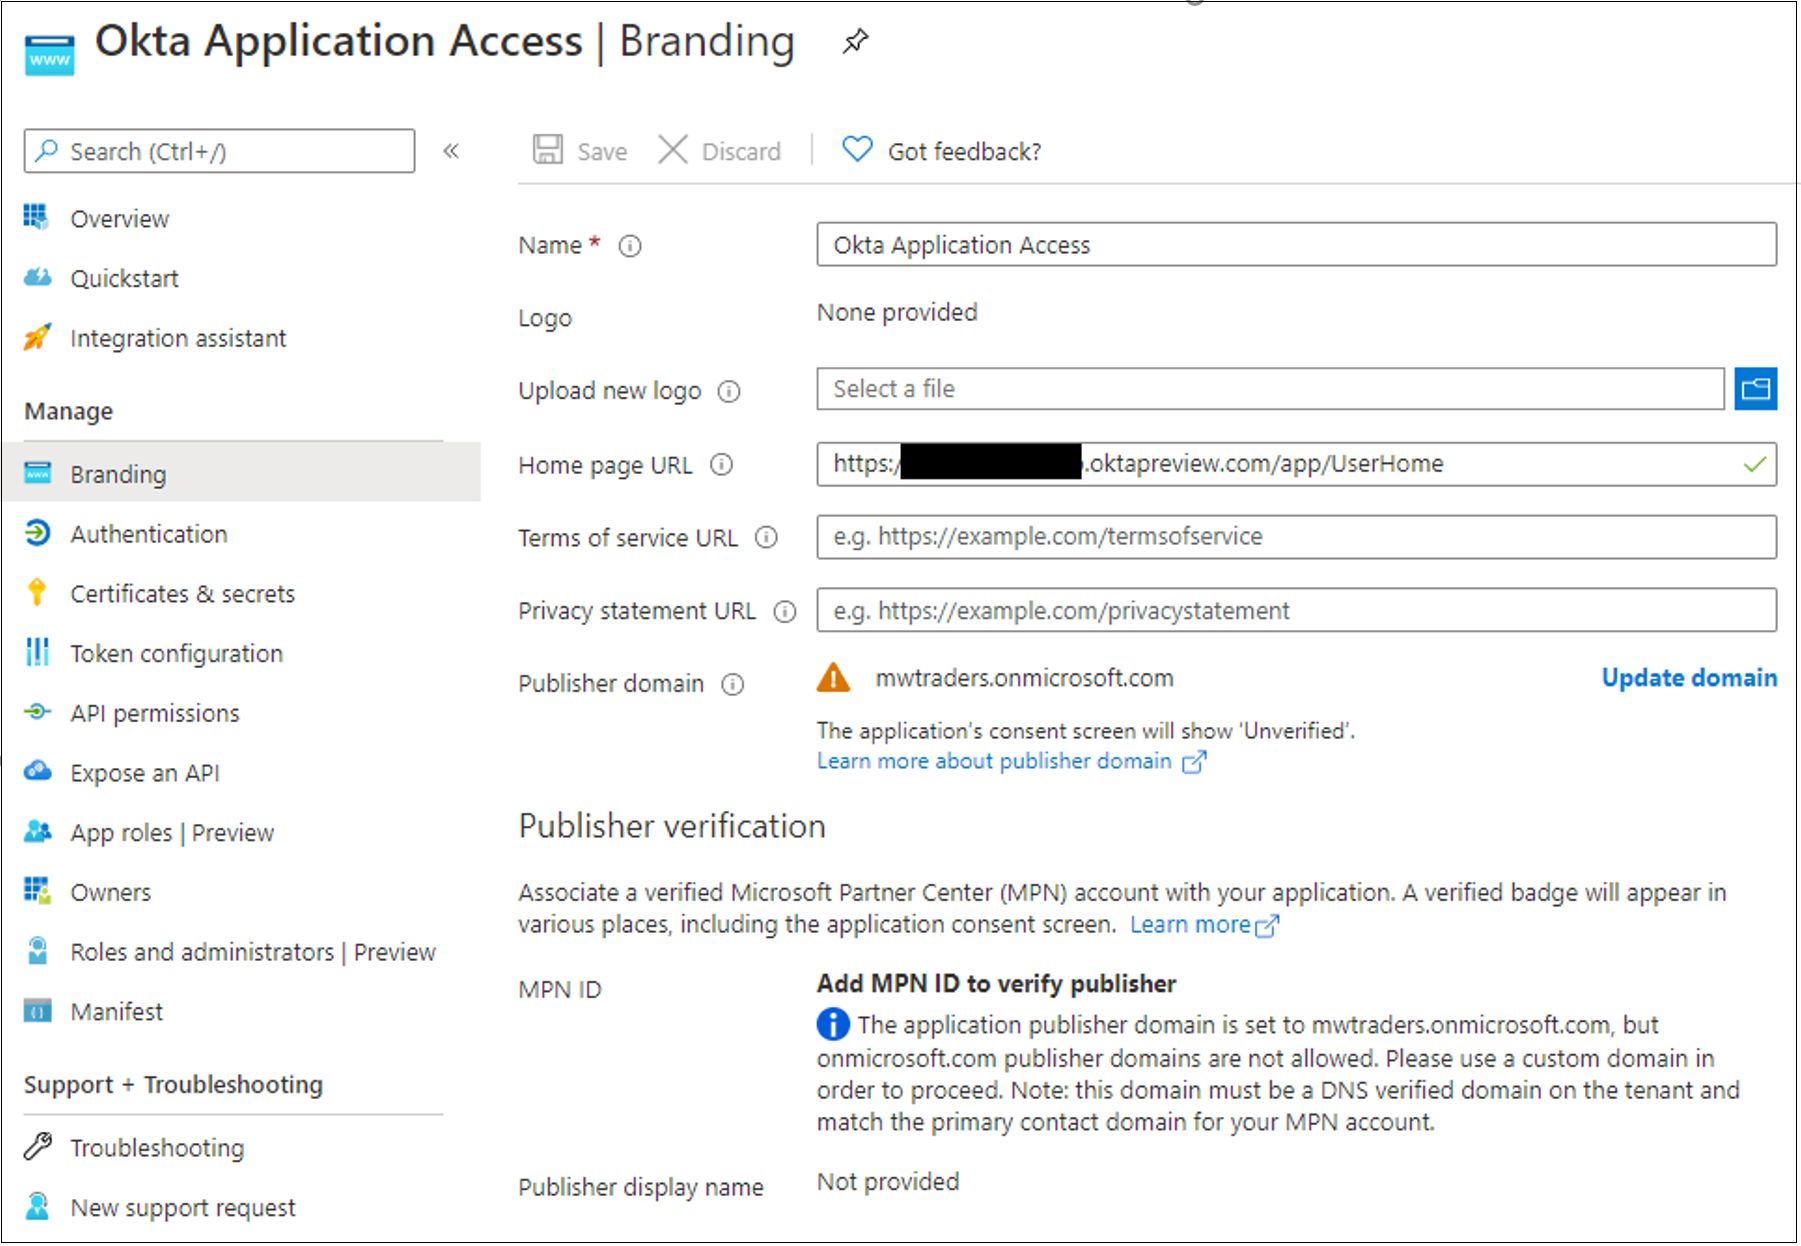 Screenshot of the Branding page in the Microsoft Entra admin center.